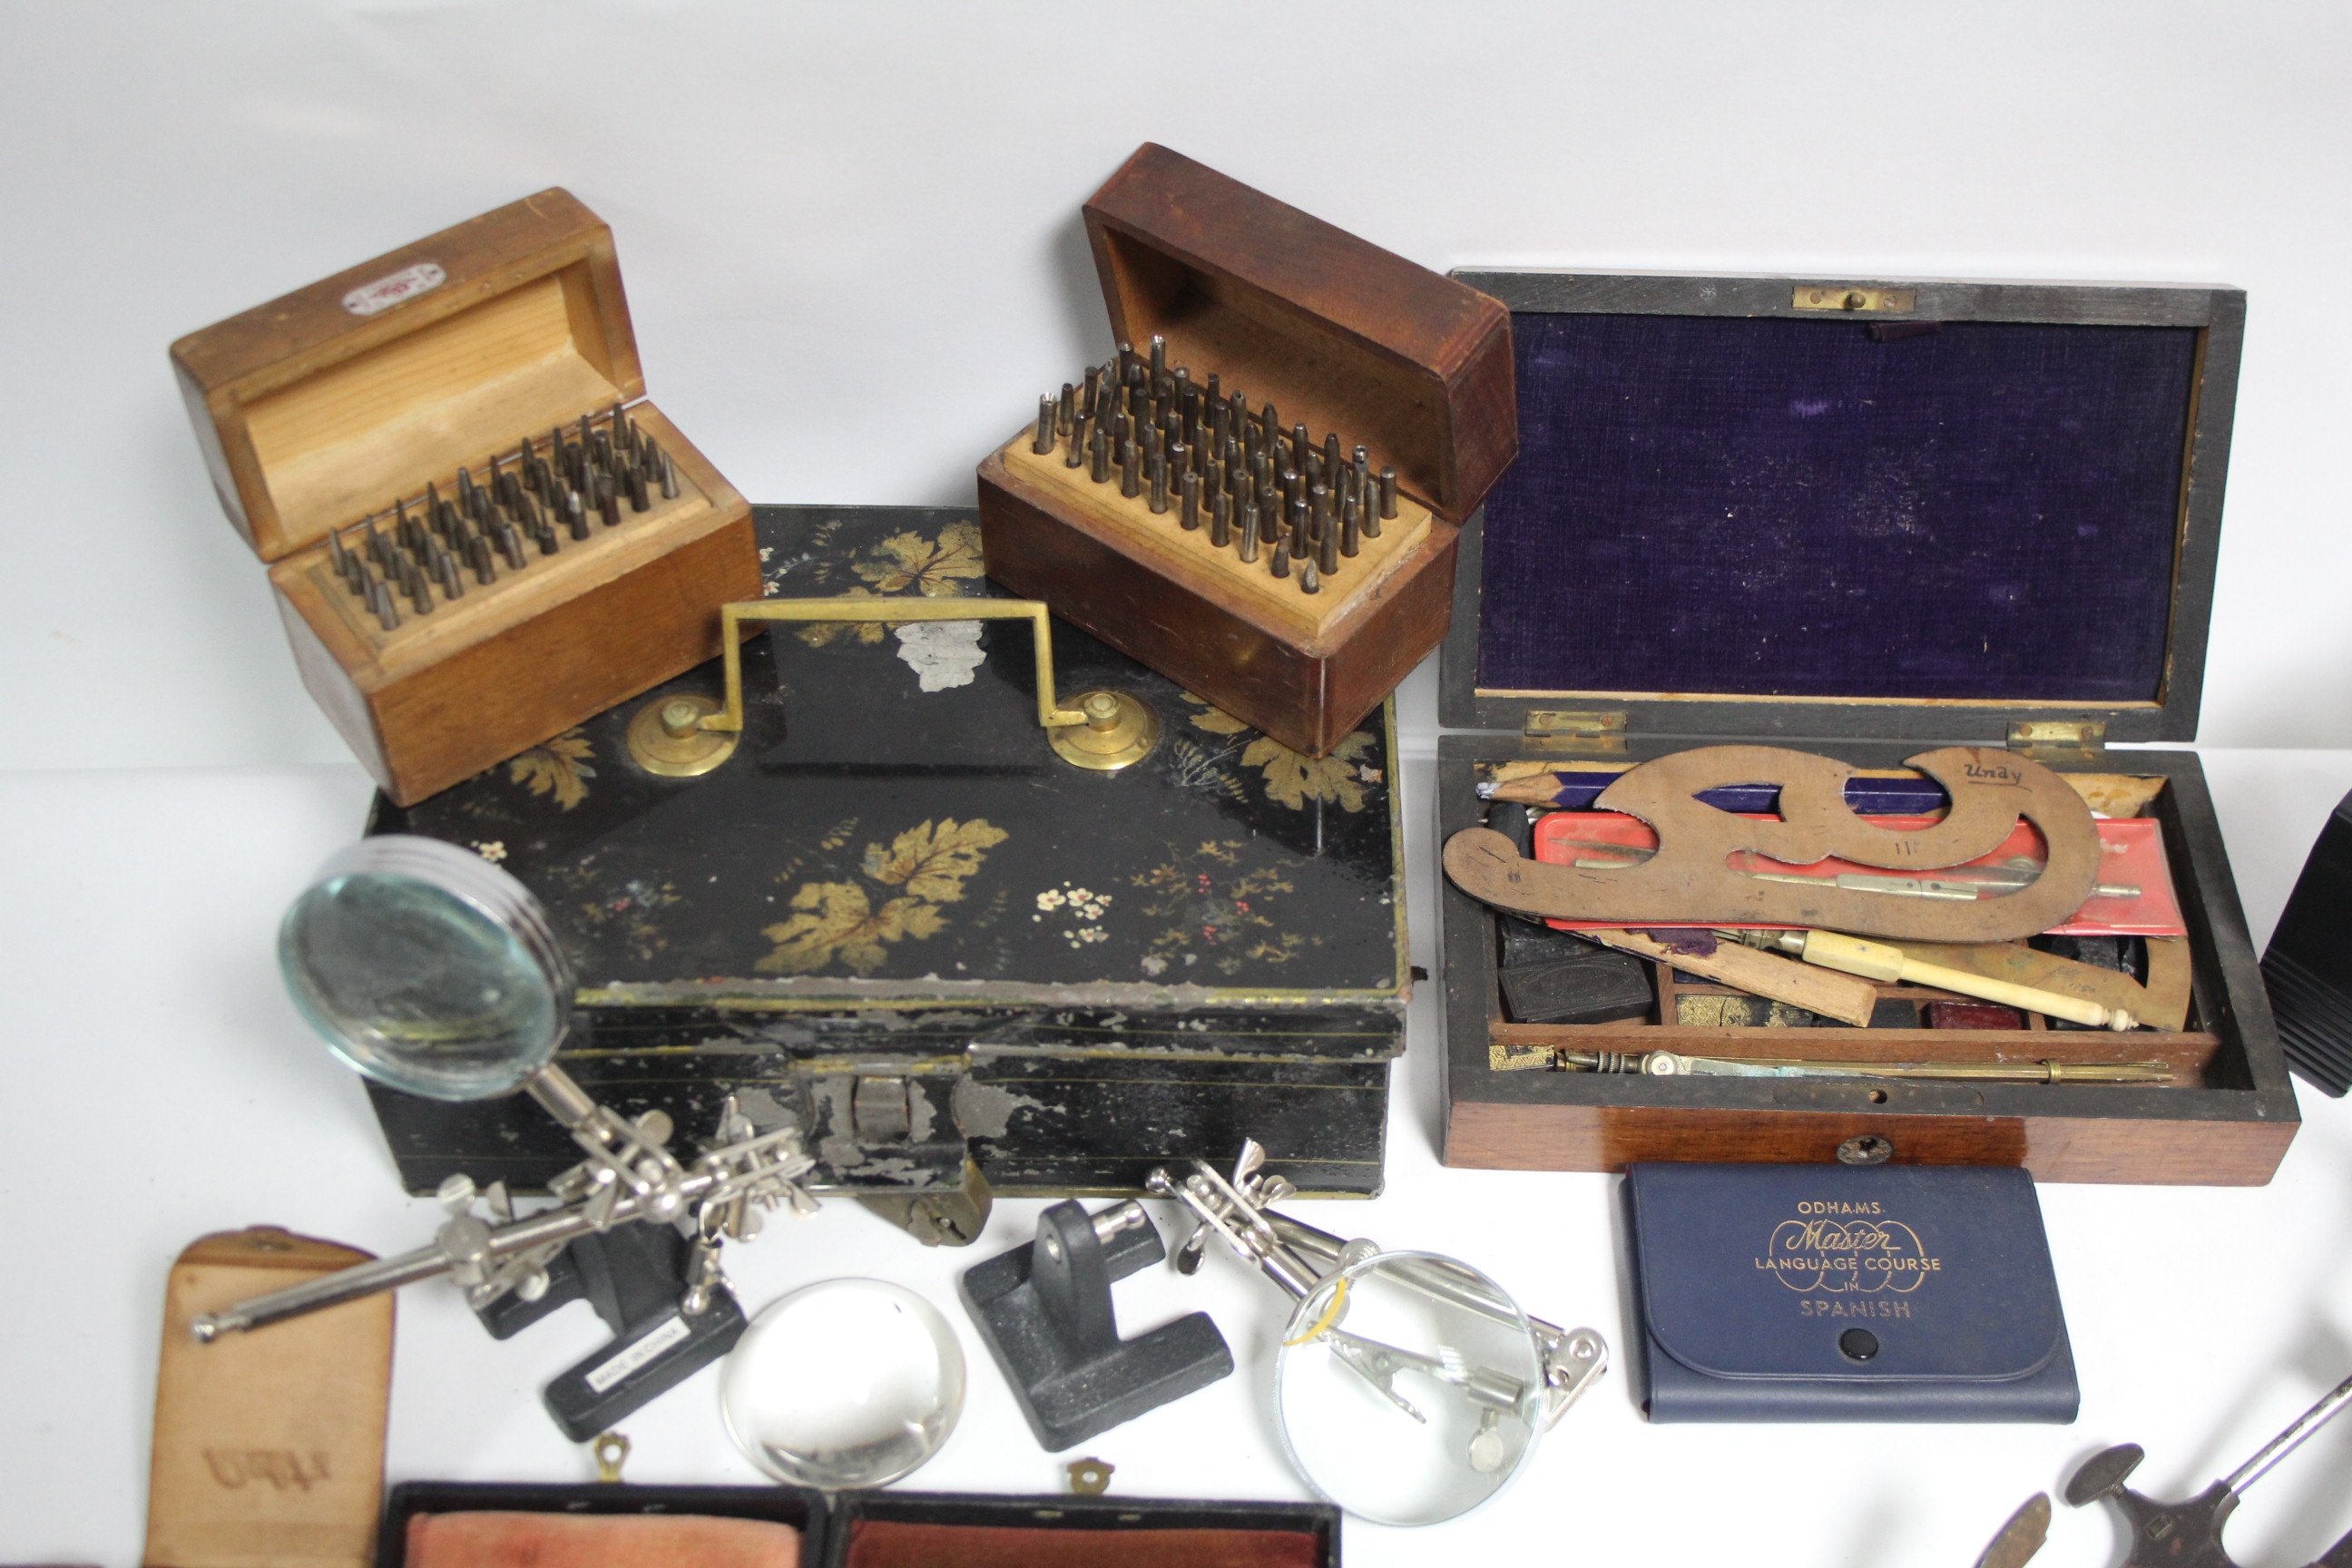 A stereoscope hand-held card viewer; various drawing instruments; a pair of Tronic field glasses, - Image 4 of 4